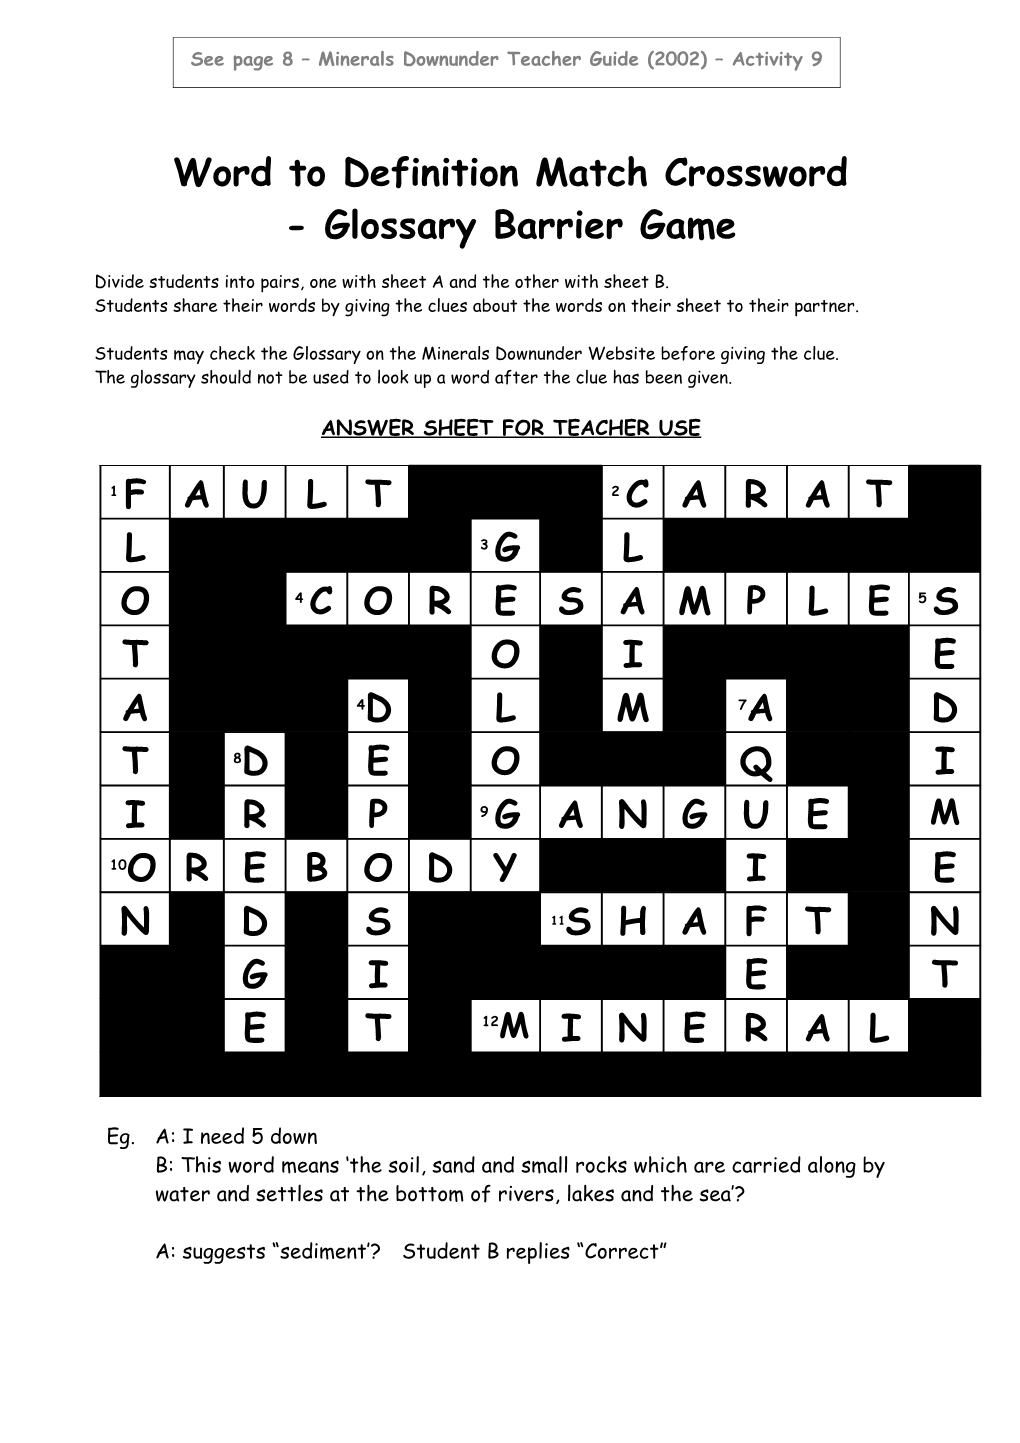 Word to Definition Match Crossword - Glossary Barrier Game